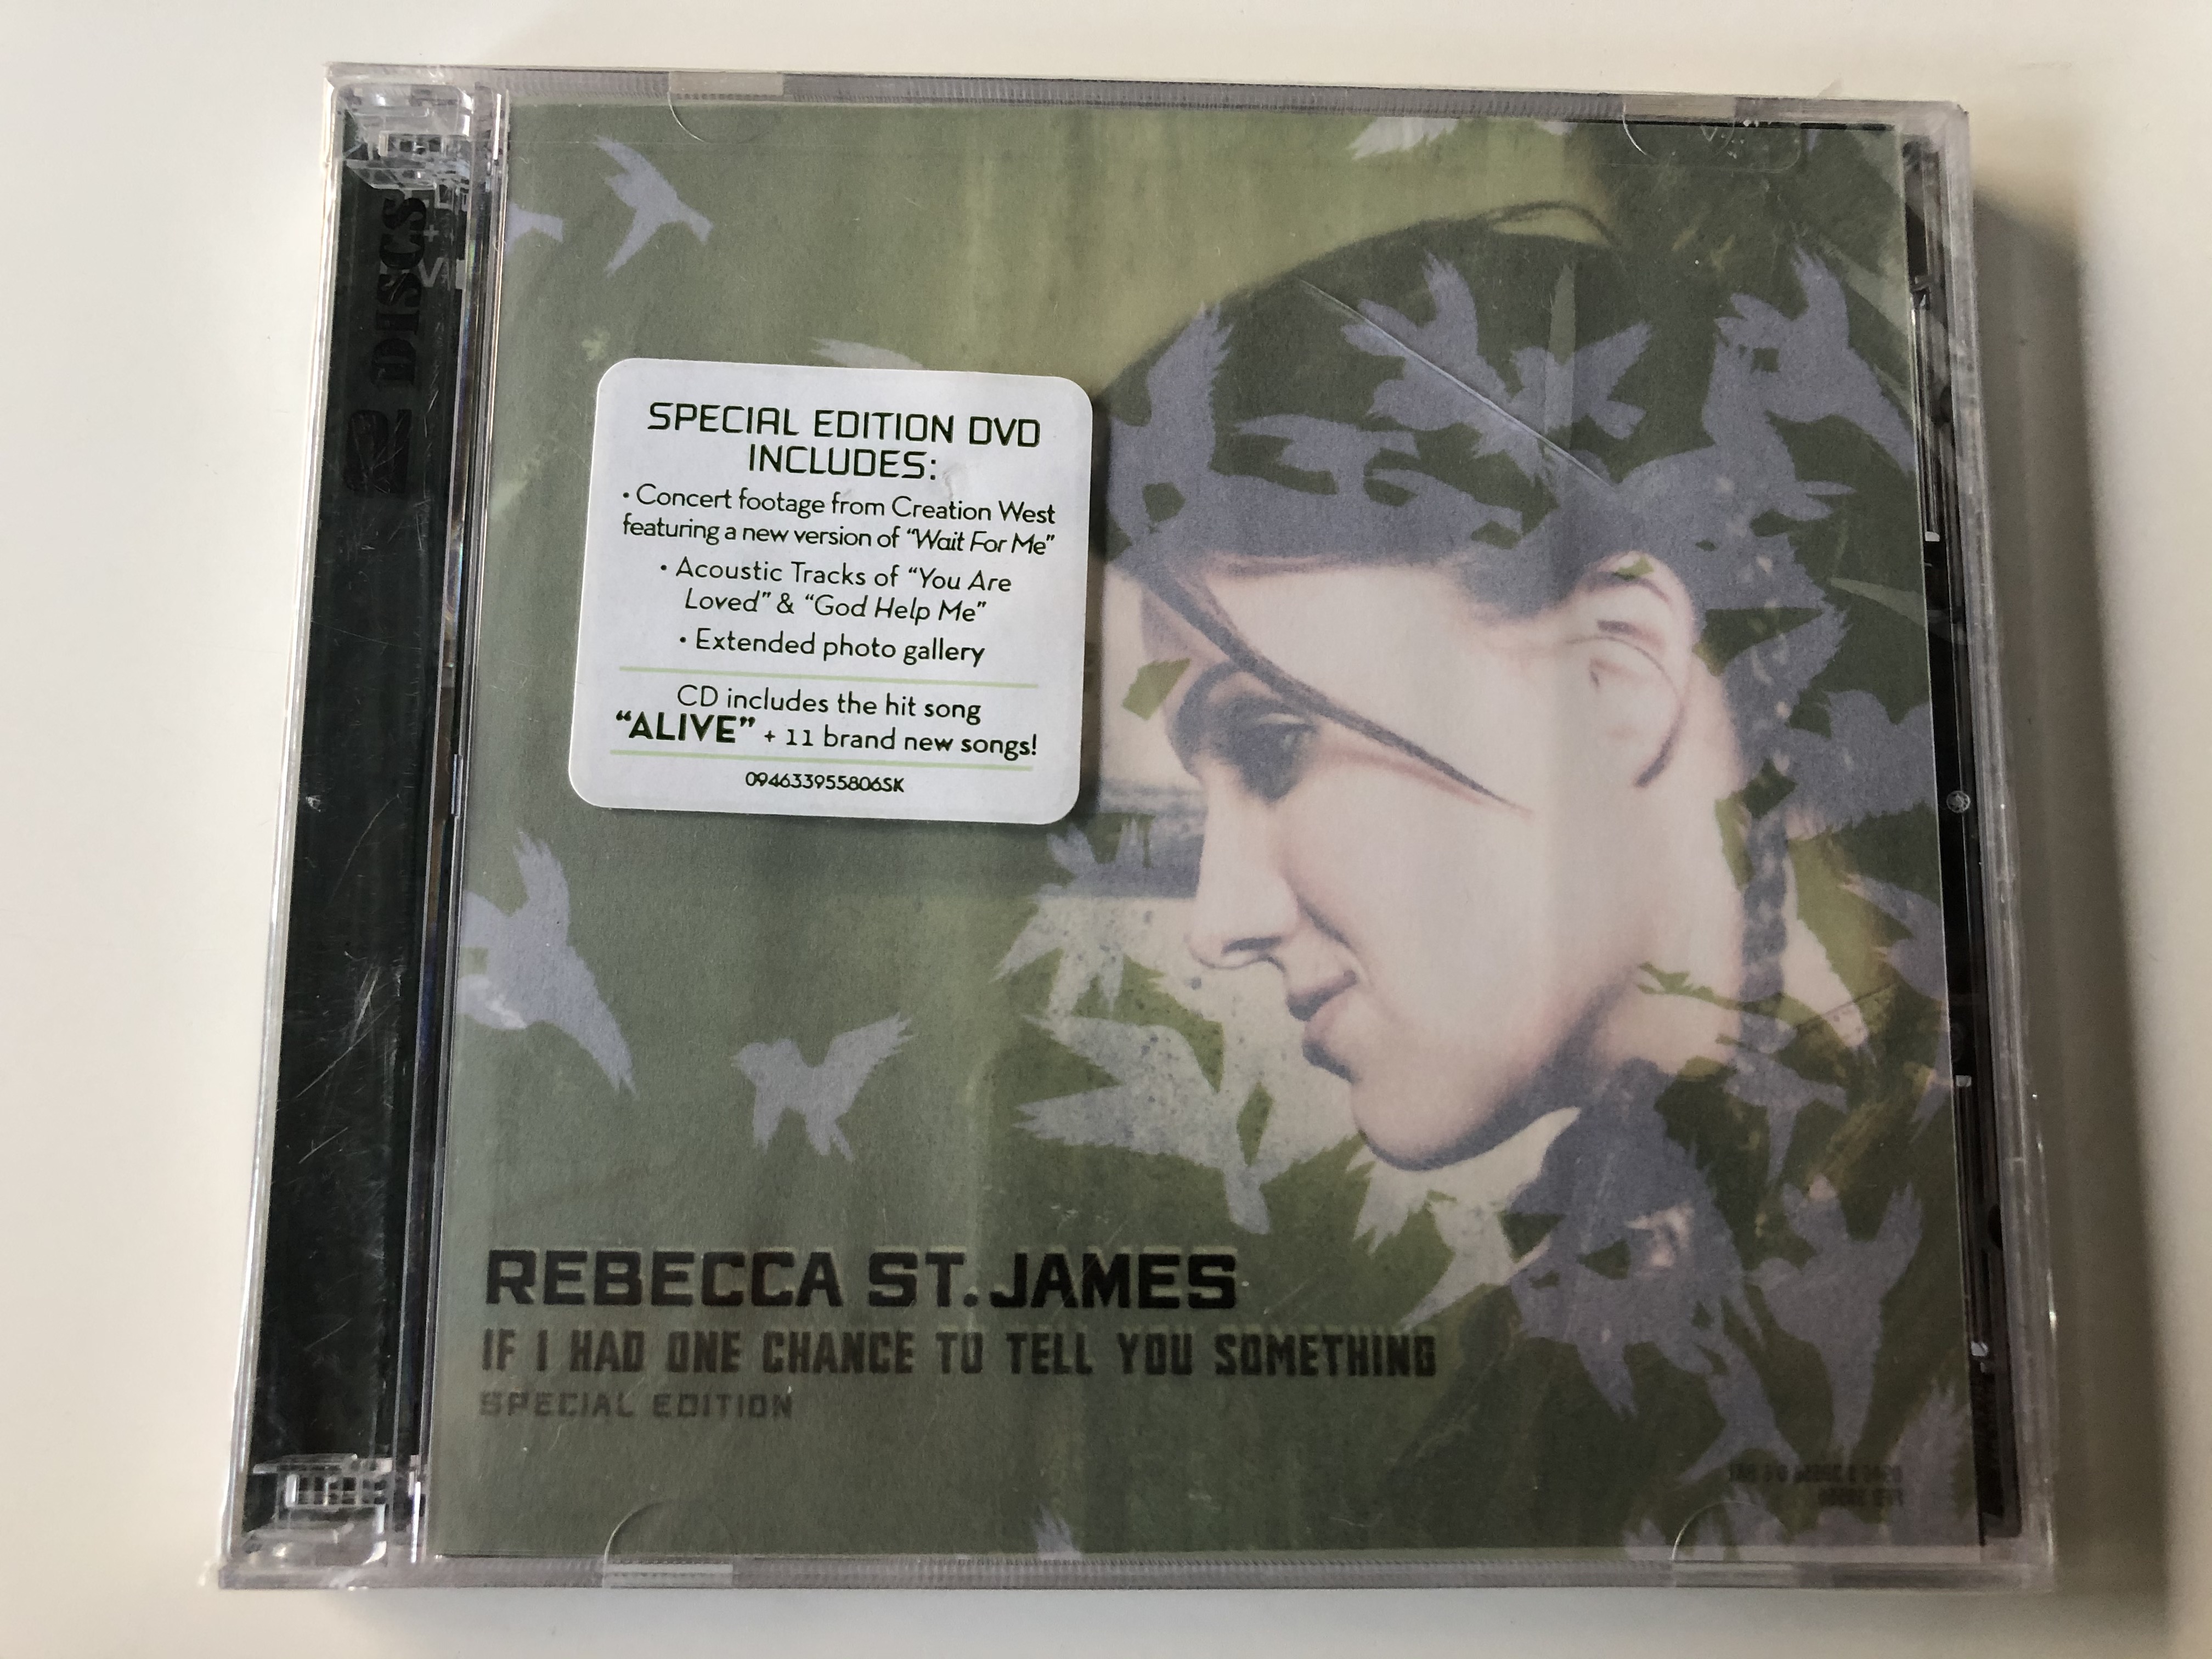 rebecca-st.-james-if-i-had-one-chance-to-tell-you-something-special-edition-forefront-records-audio-cd-dvd-2005-ffd-39558-1-.jpg